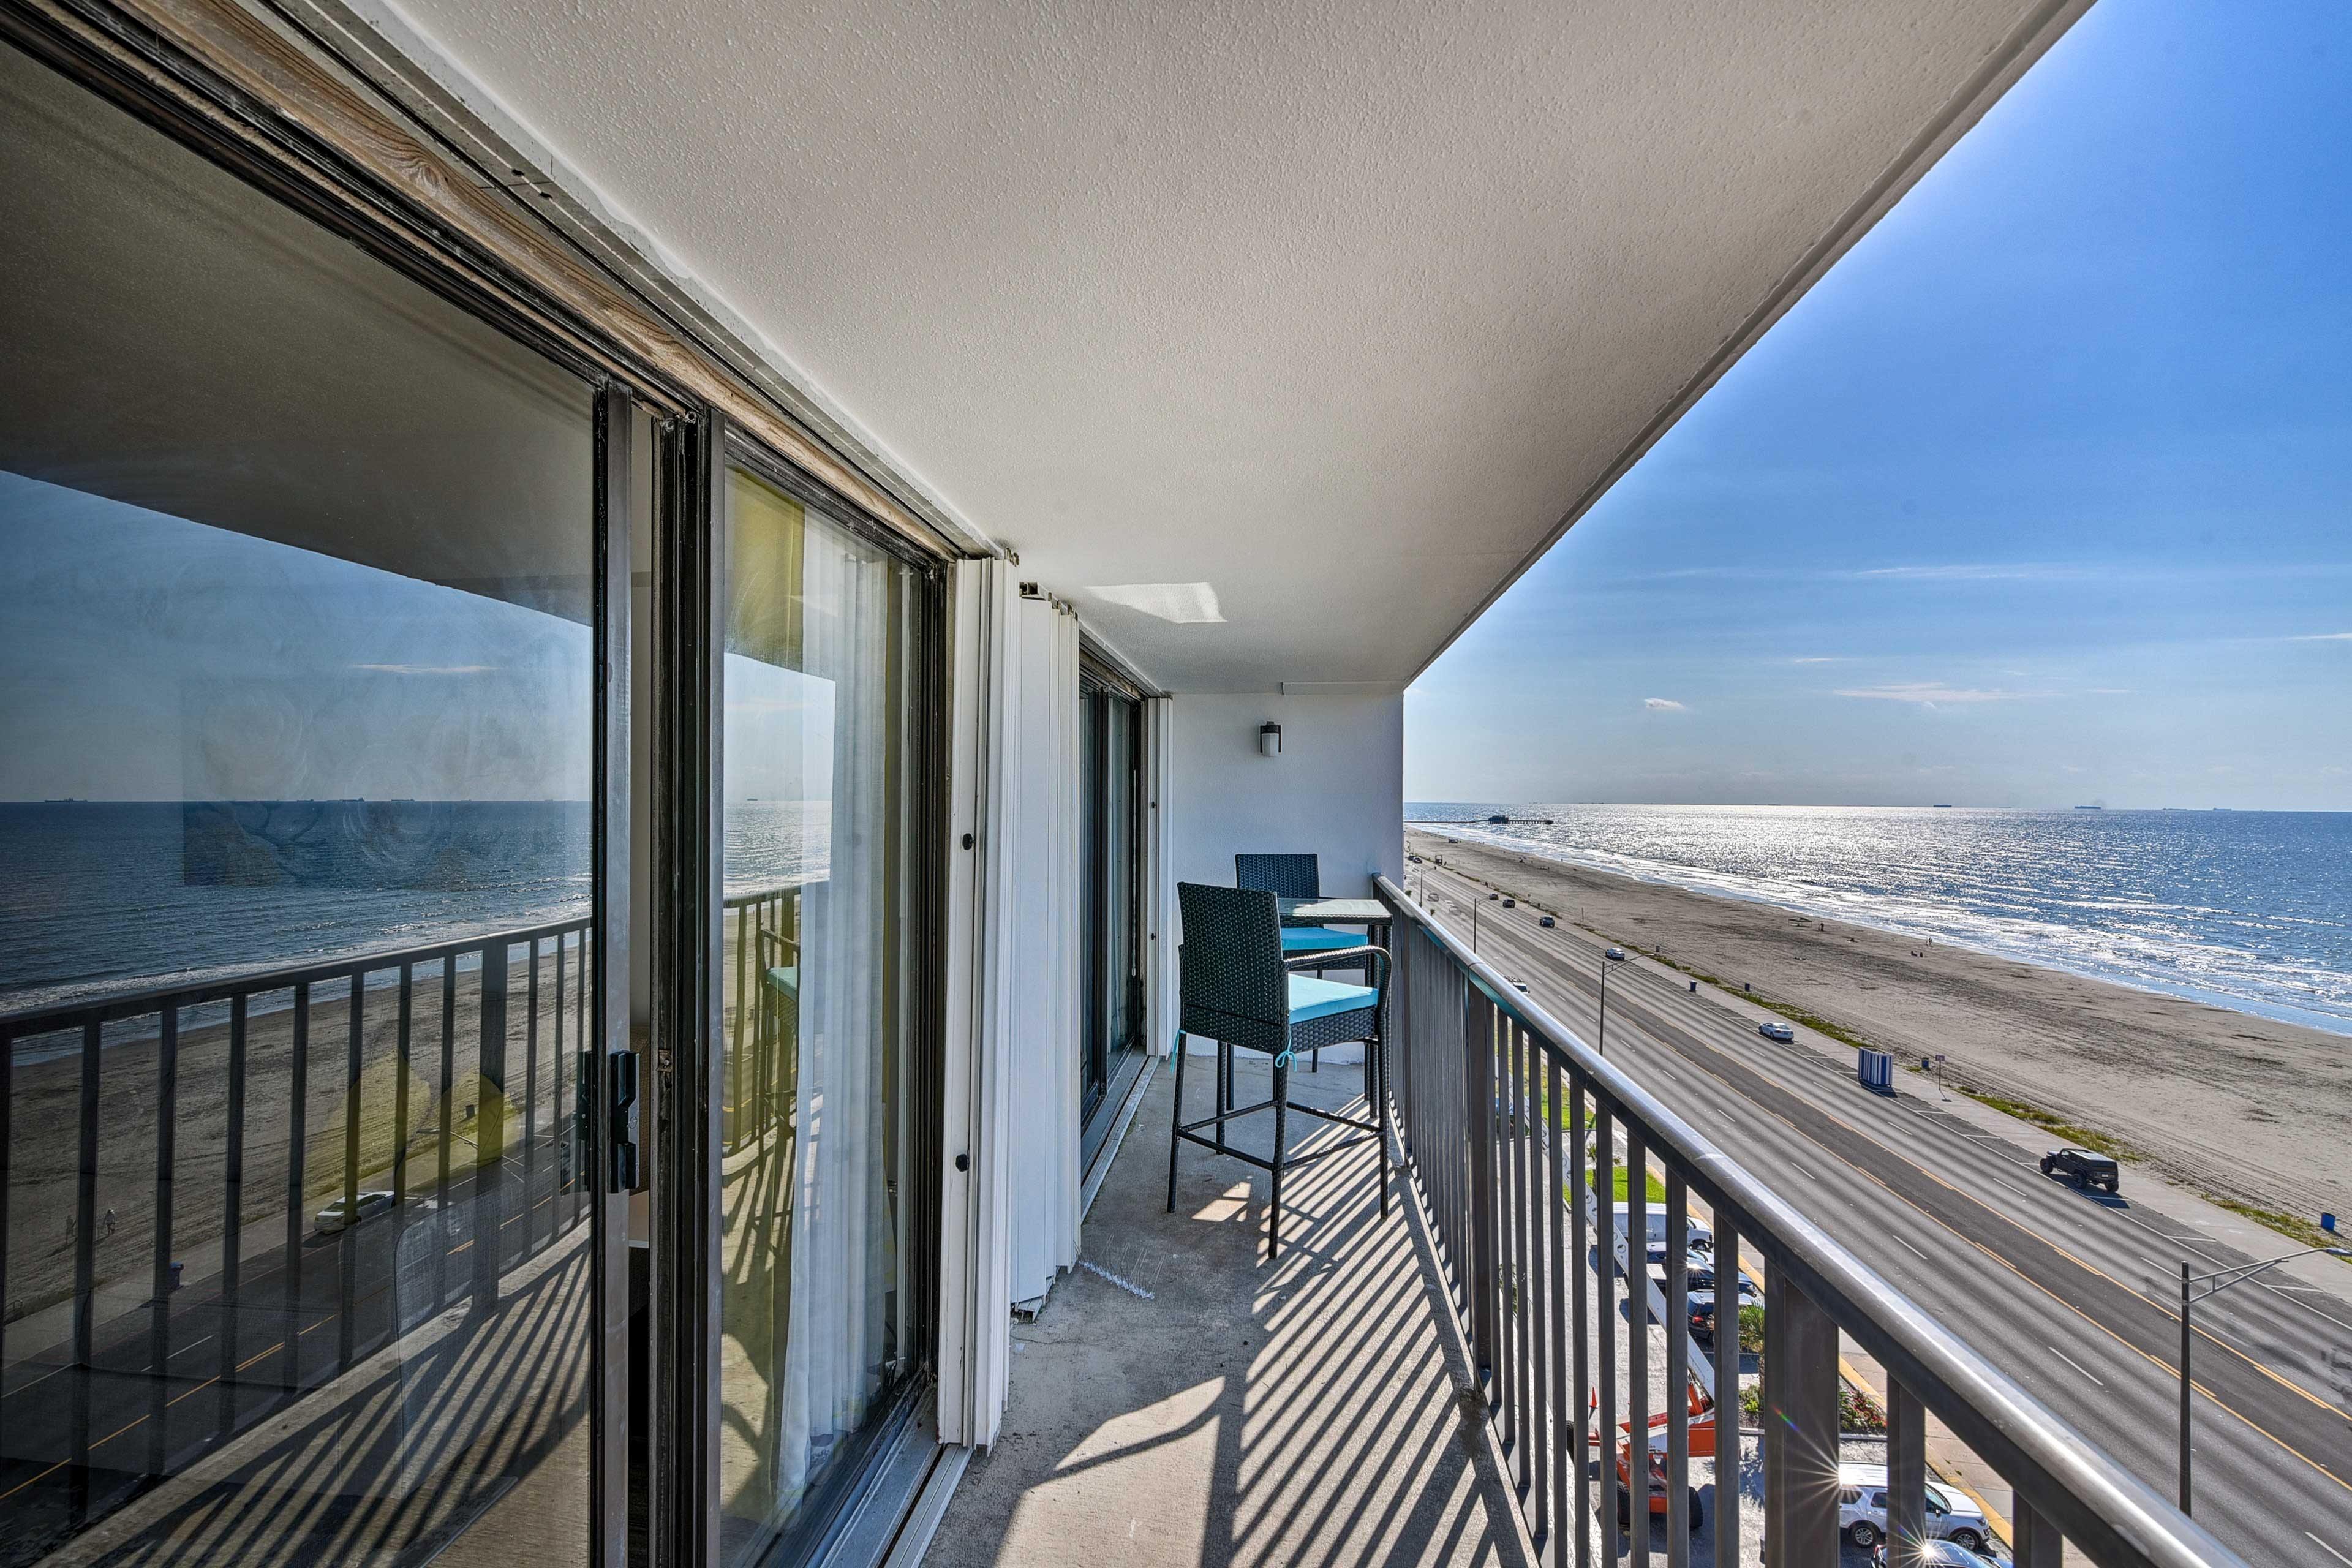 Sip on your morning coffee on the private balcony.